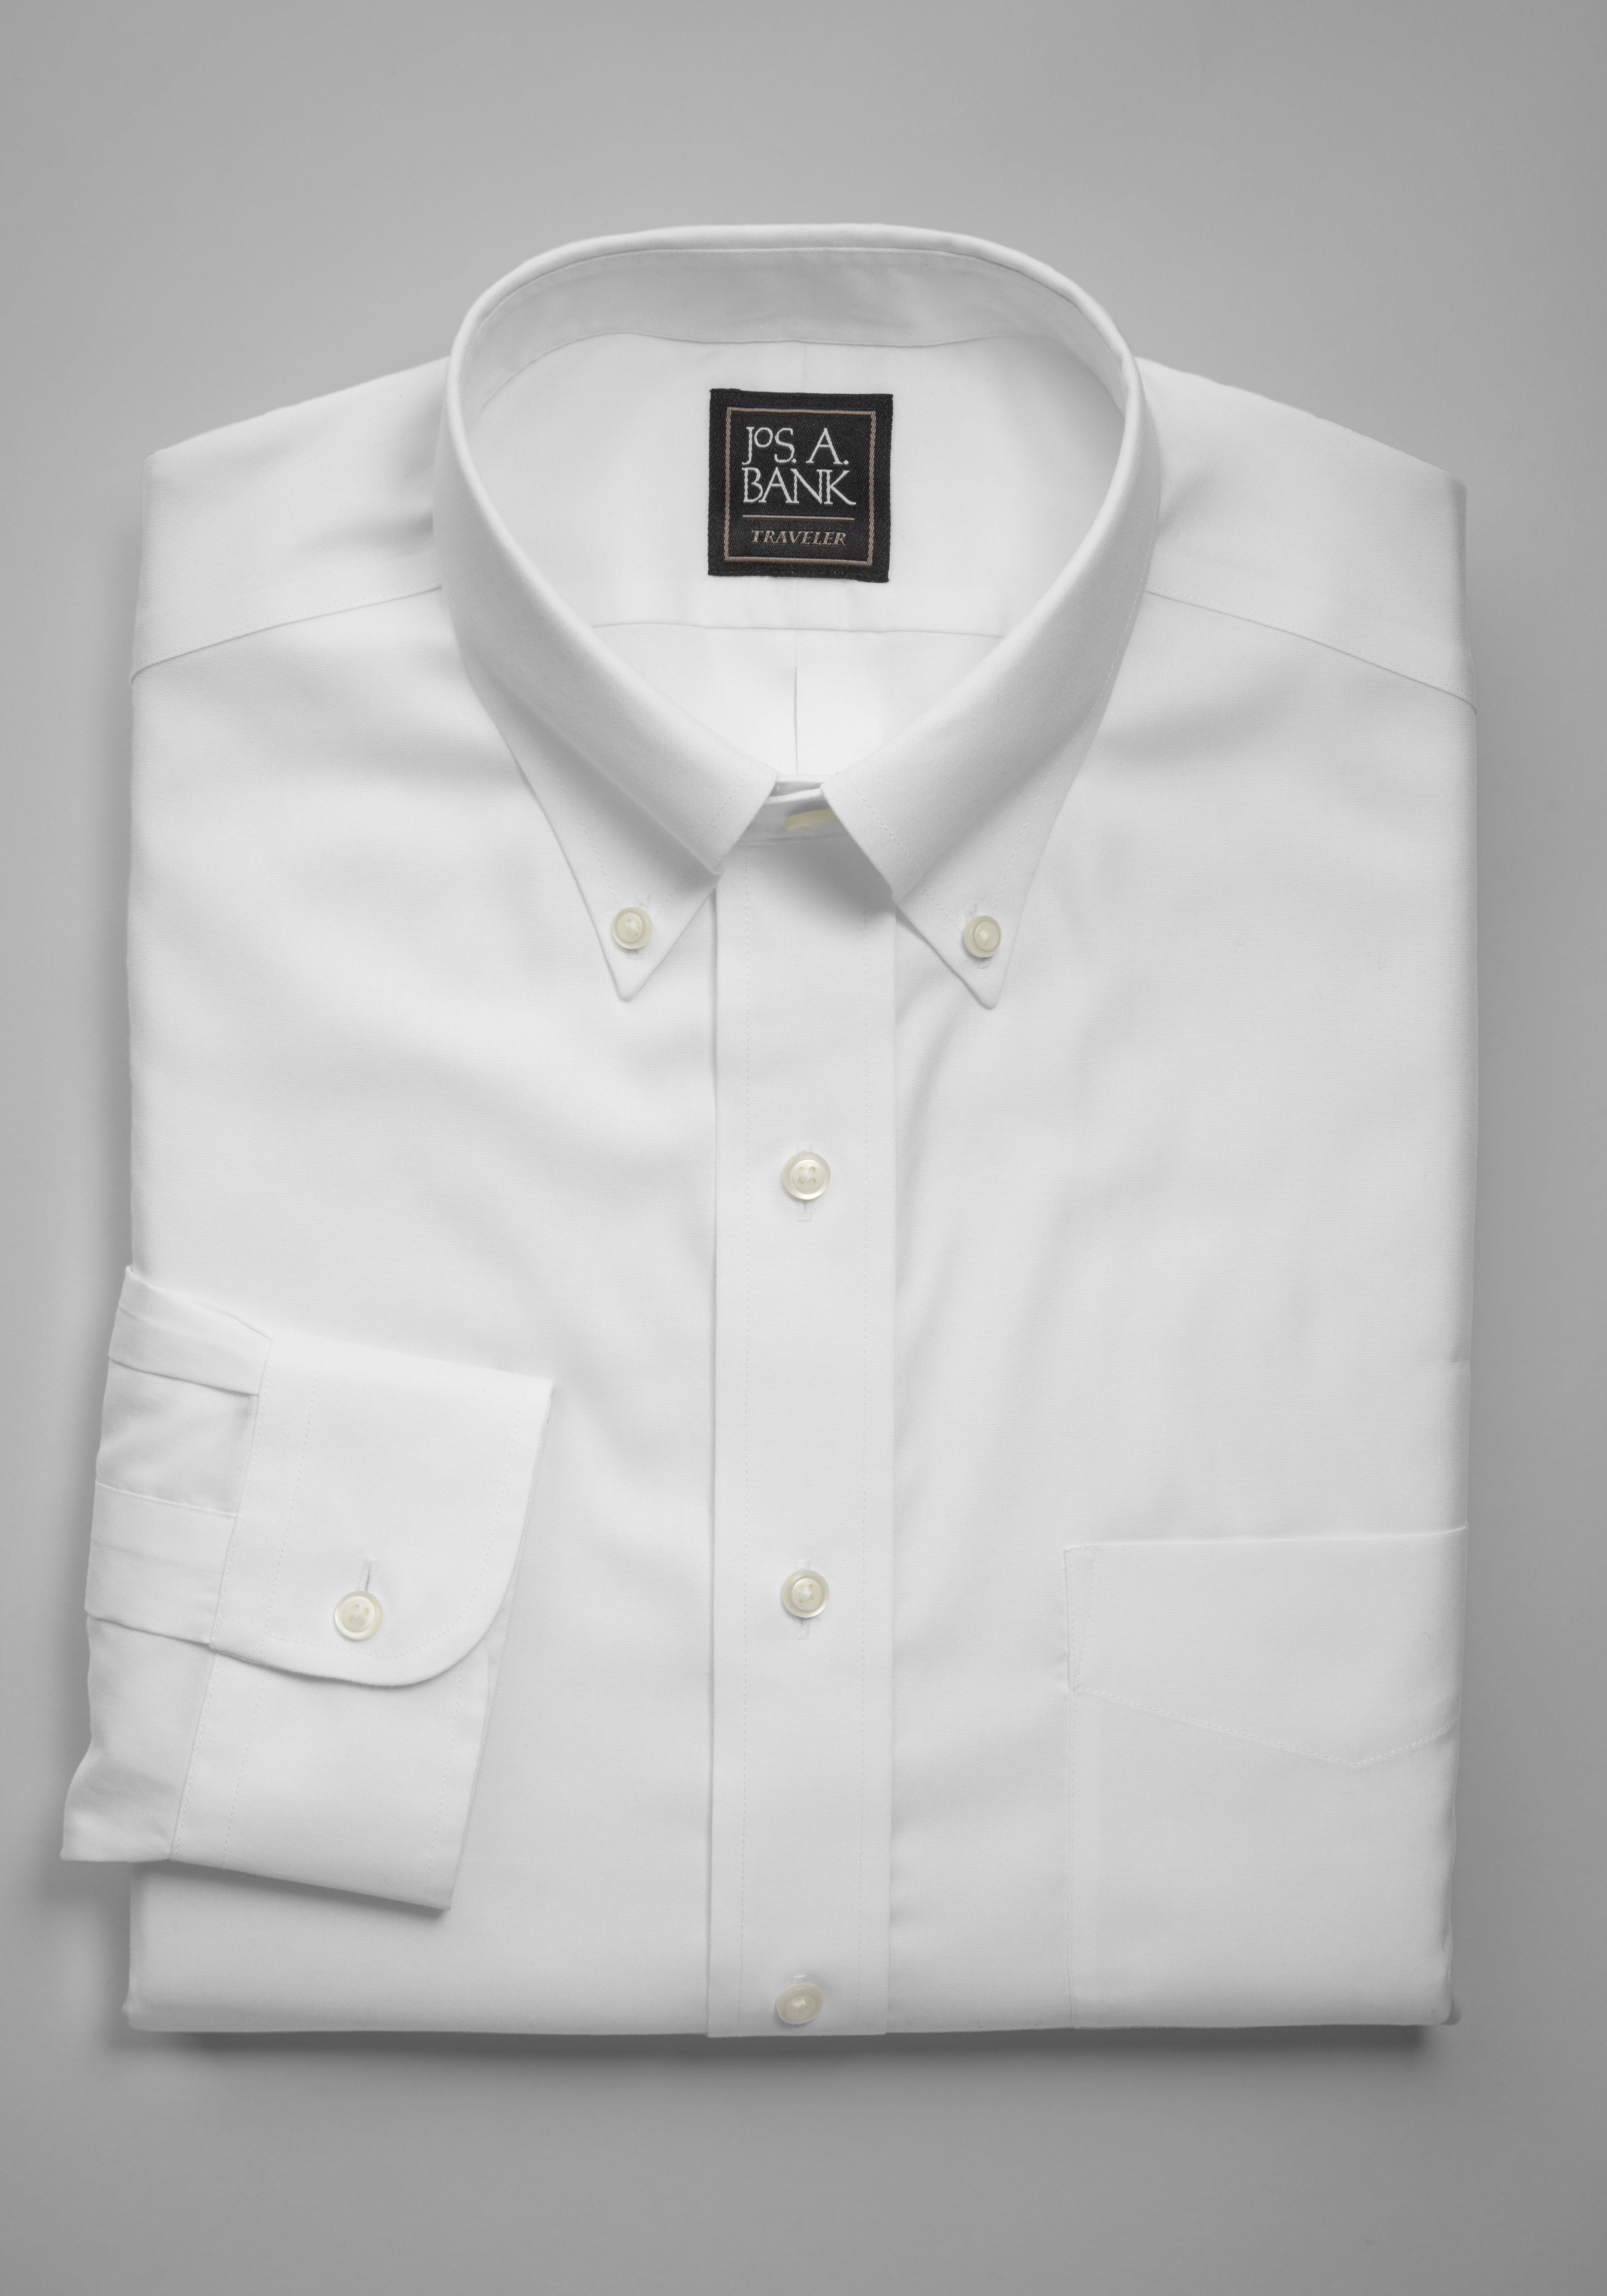 The Mens Black Dress Shirt: Our Definitive Style & Buying Guide